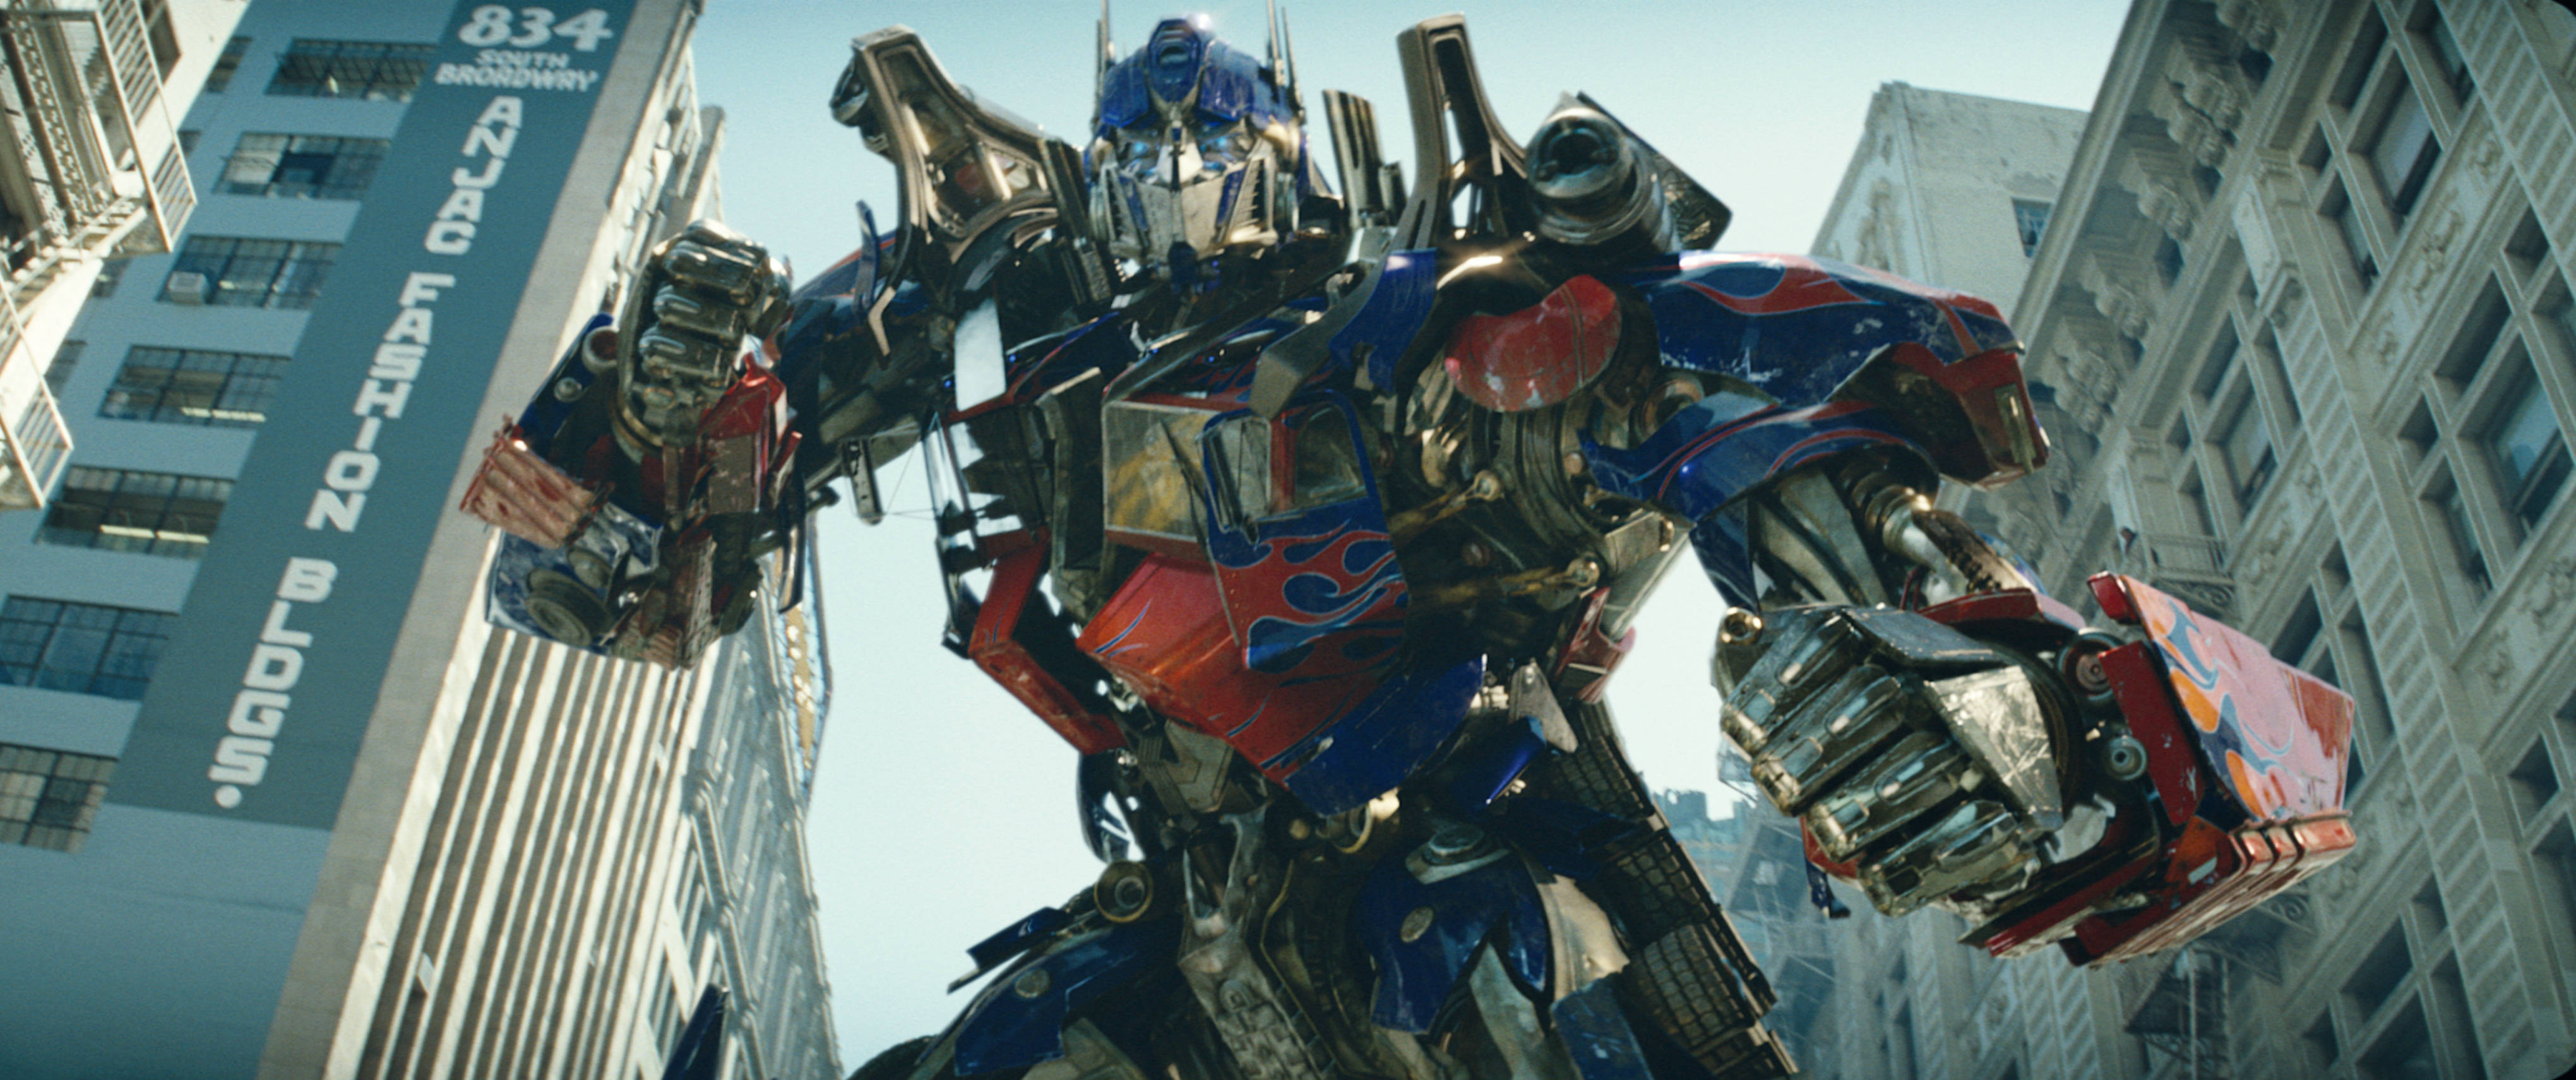 Movie Series Review: Transformers